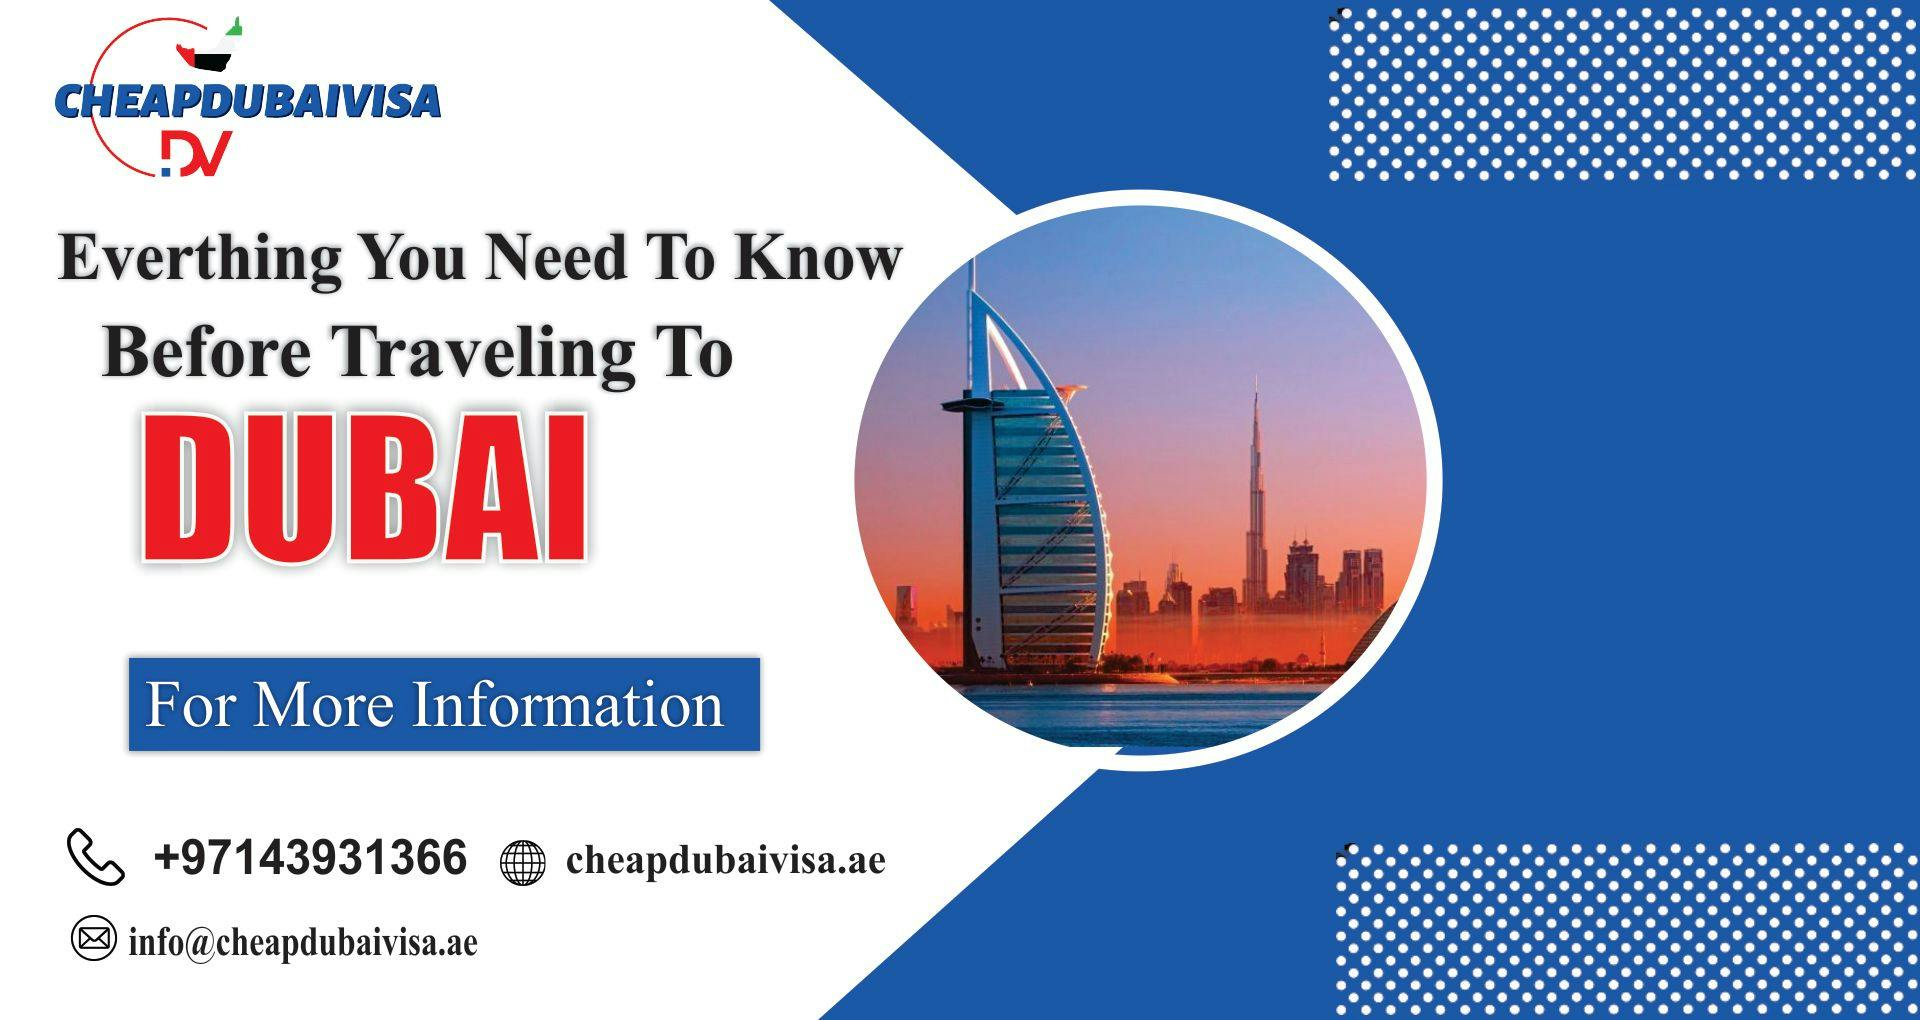 Everything you need to know before traveling to Dubai